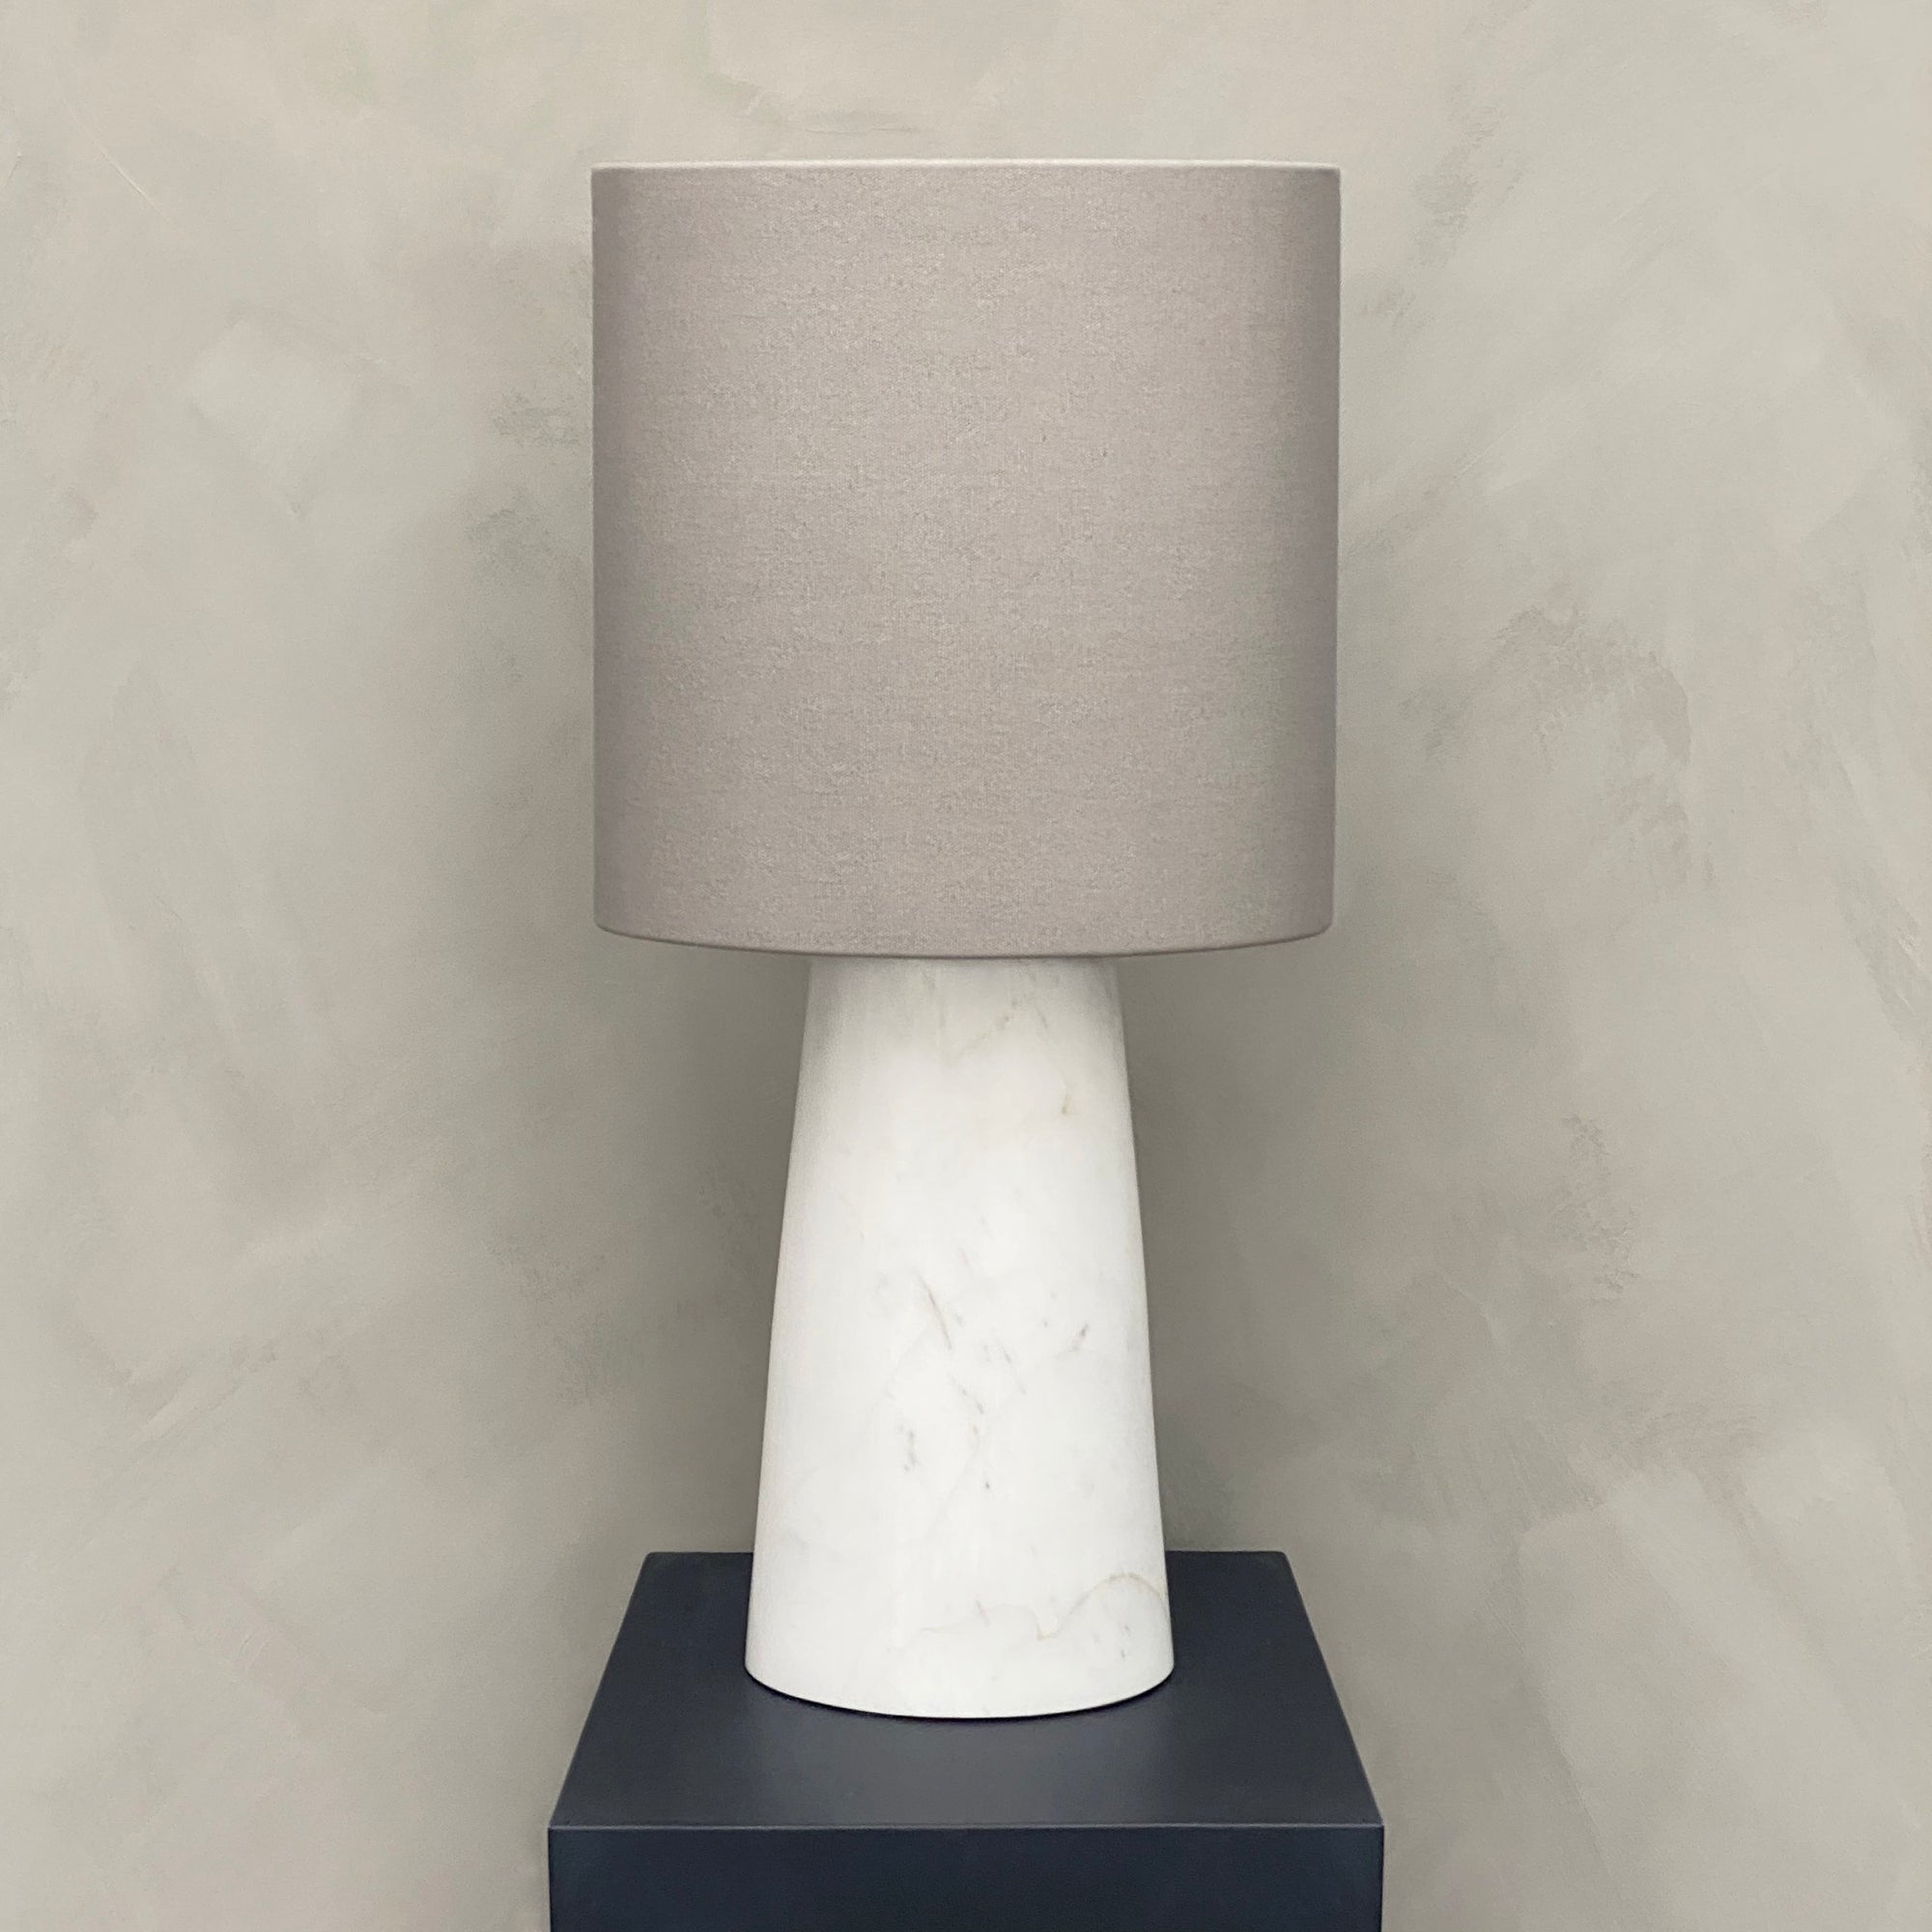 BRANDT Collective table lamp in marble Shaded White and grey shade